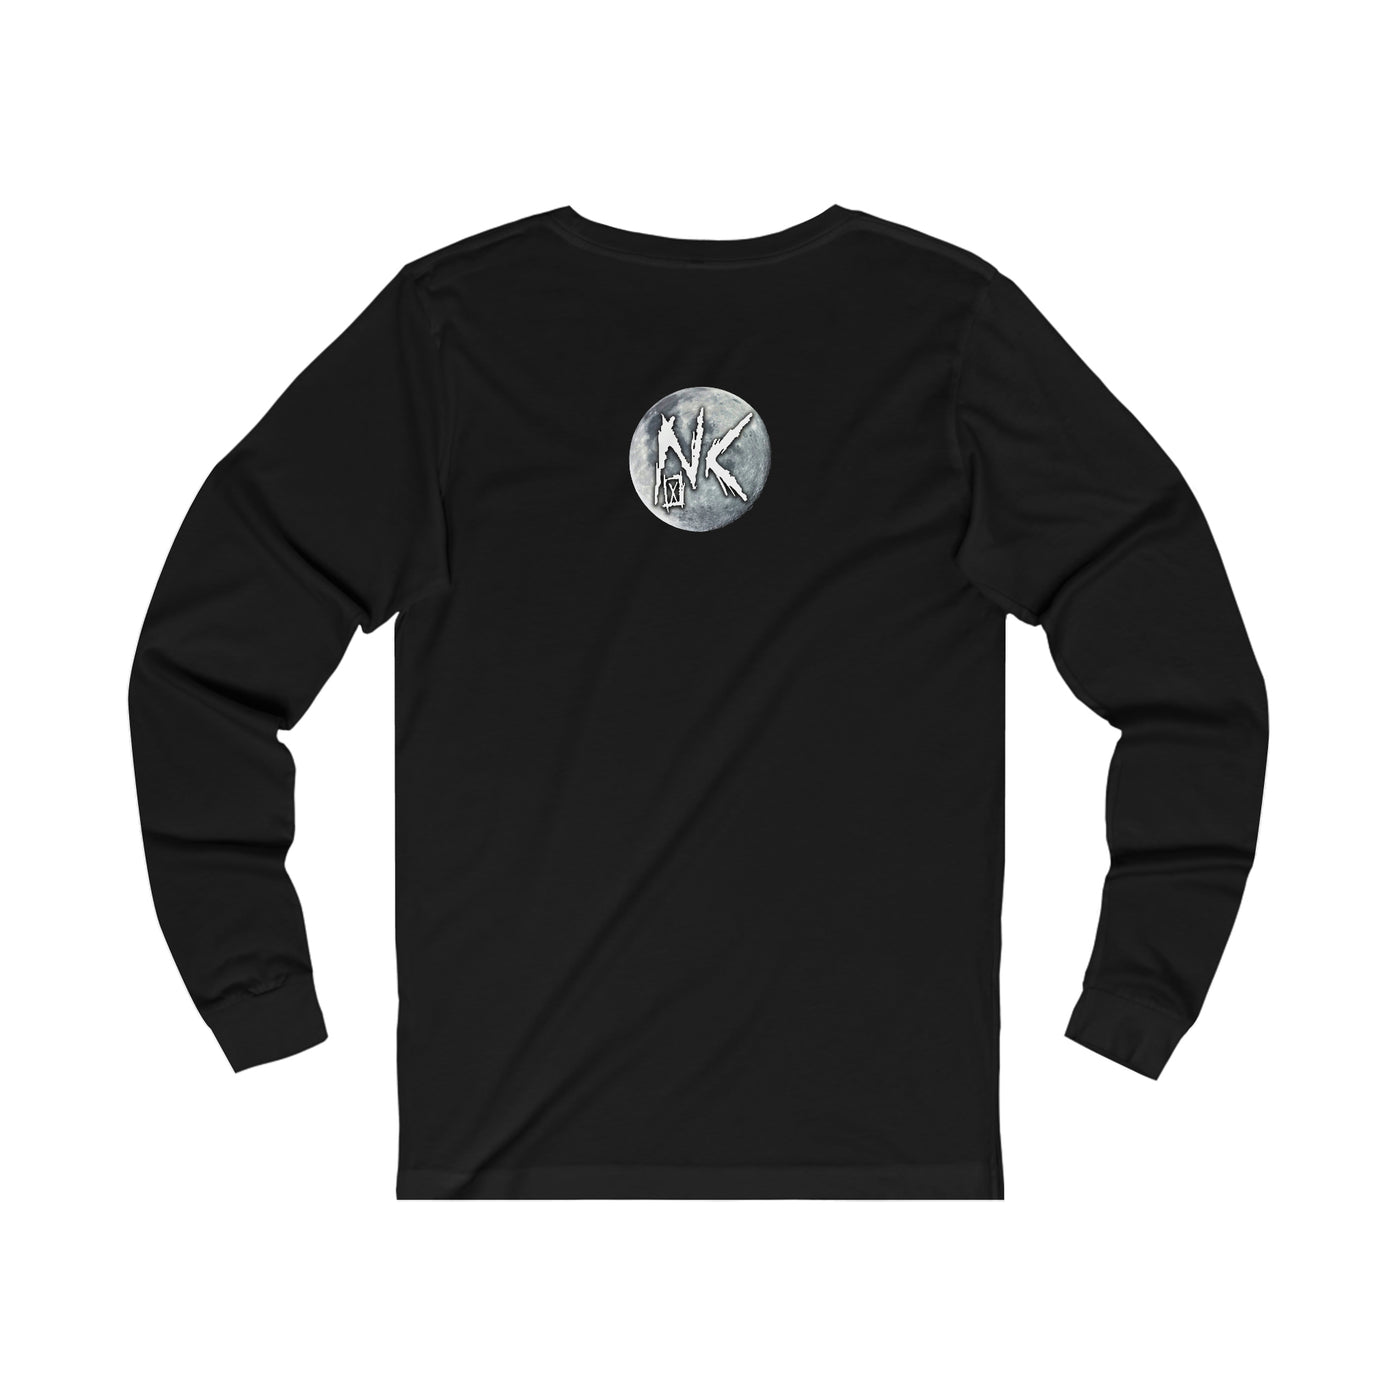 Army Green Jersey Long Sleeve Tee - NoCeilingsClothing